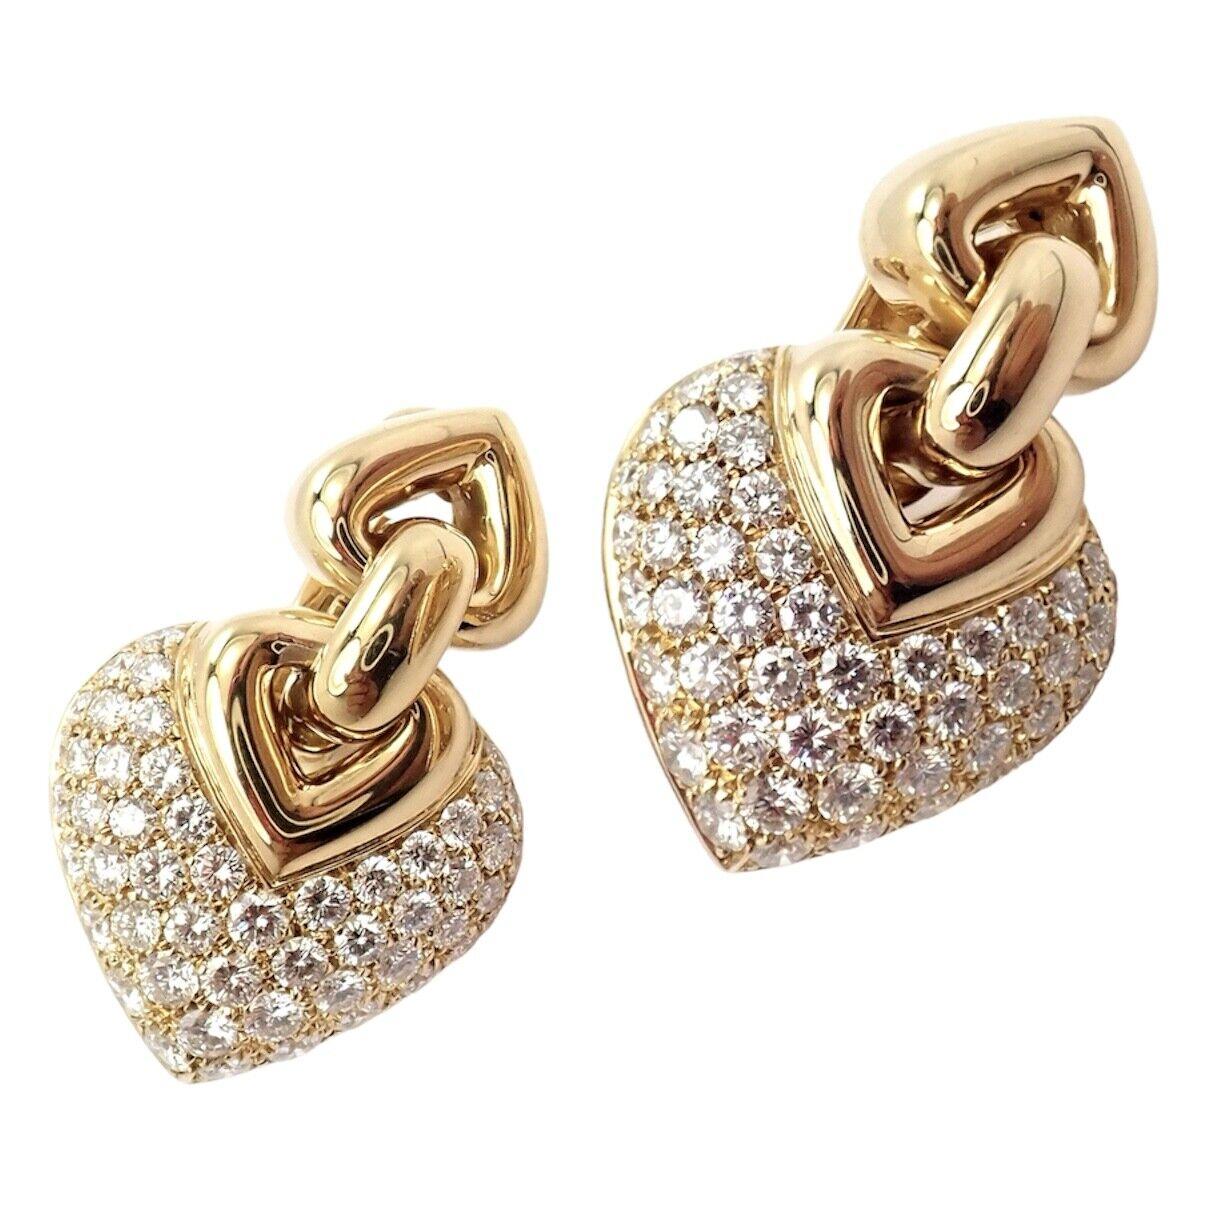 18k Yellow Gold Diamond Doppio Cuore Heart Earrings by Bulgari.
With 102 round brilliant cut diamonds VVS1 clarity, E color total weight approx. 4.00ct
These earrings are for pierced ears.
Details:
Weight: 33.1 grams
Measurements: 20mm x